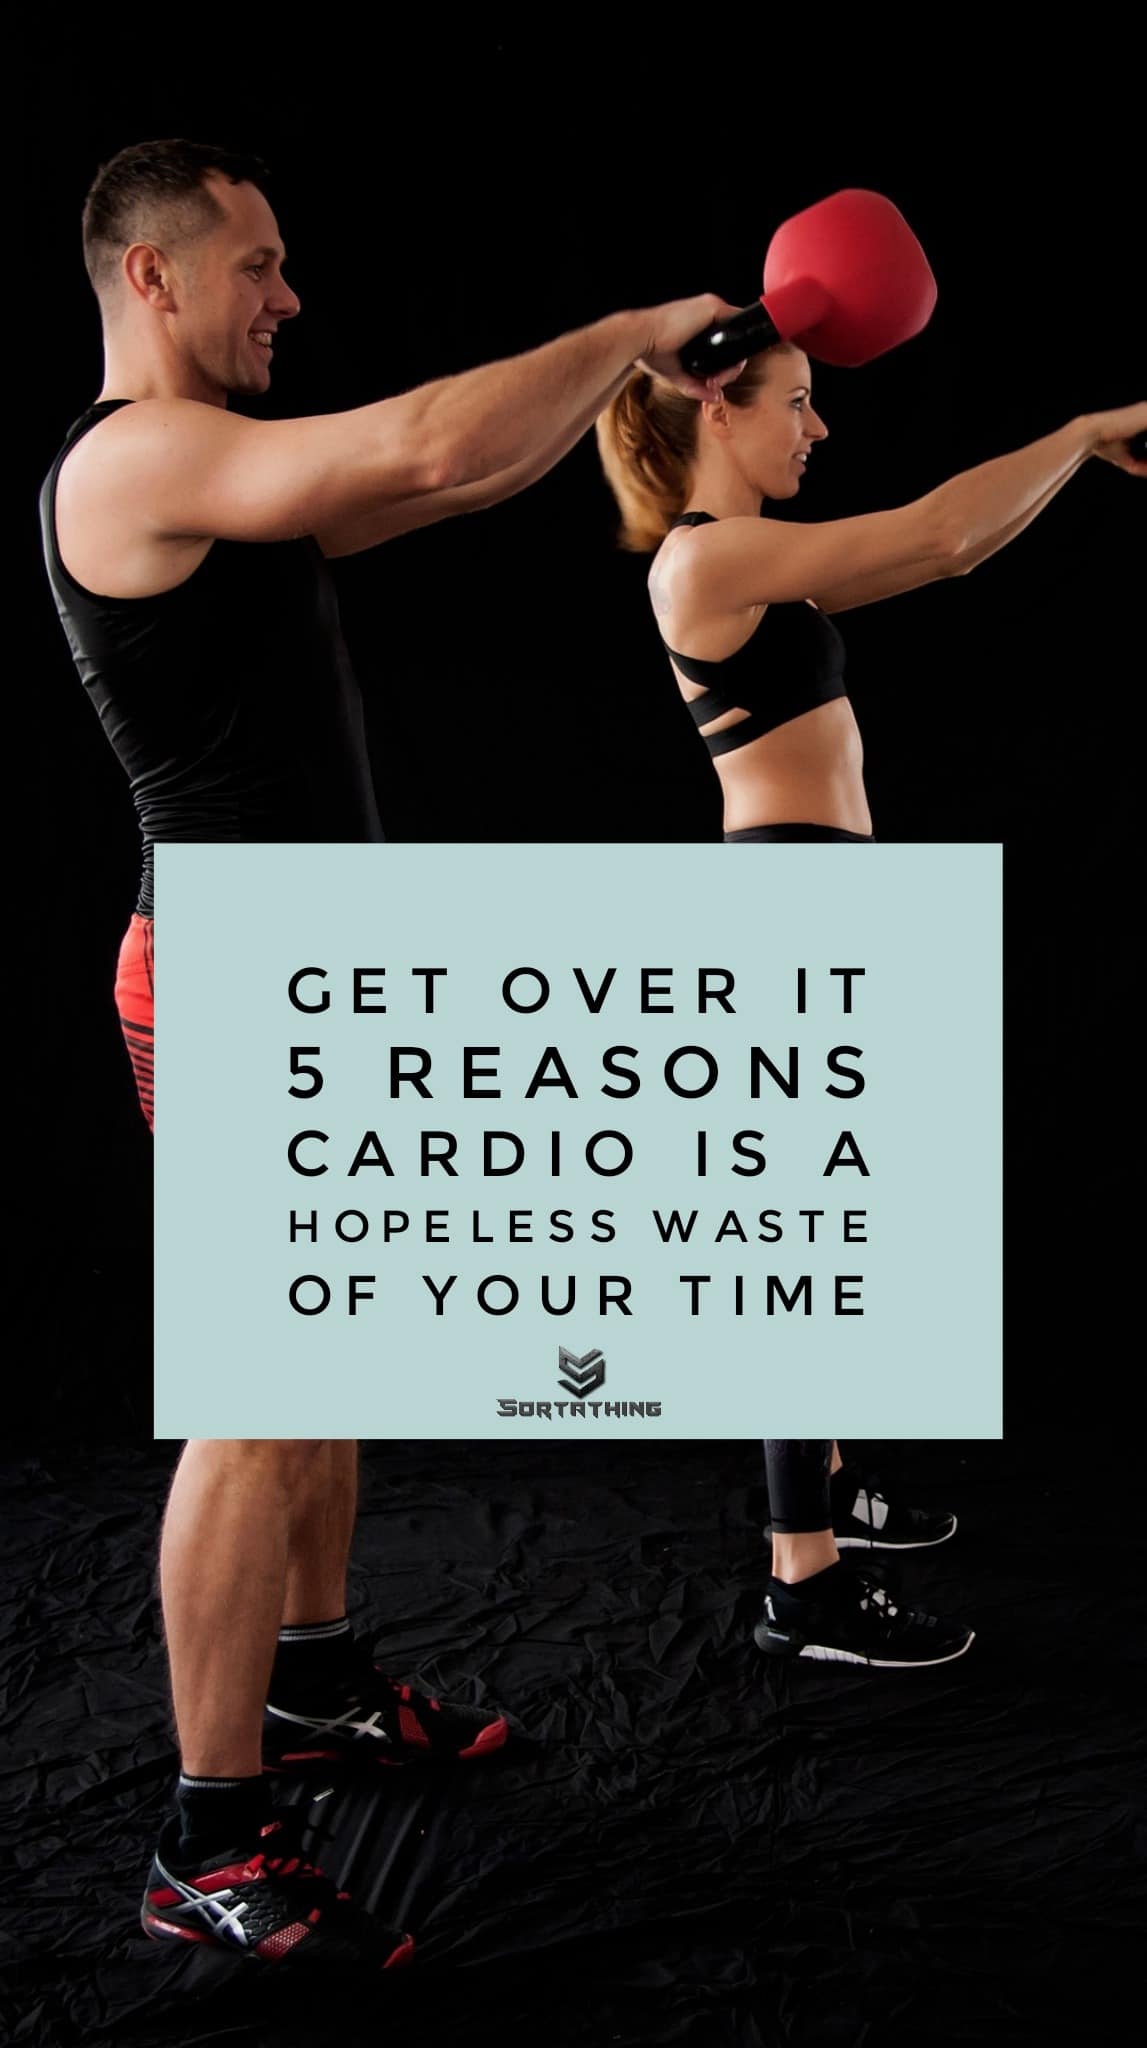 Expensive - Cardio Waste of Time